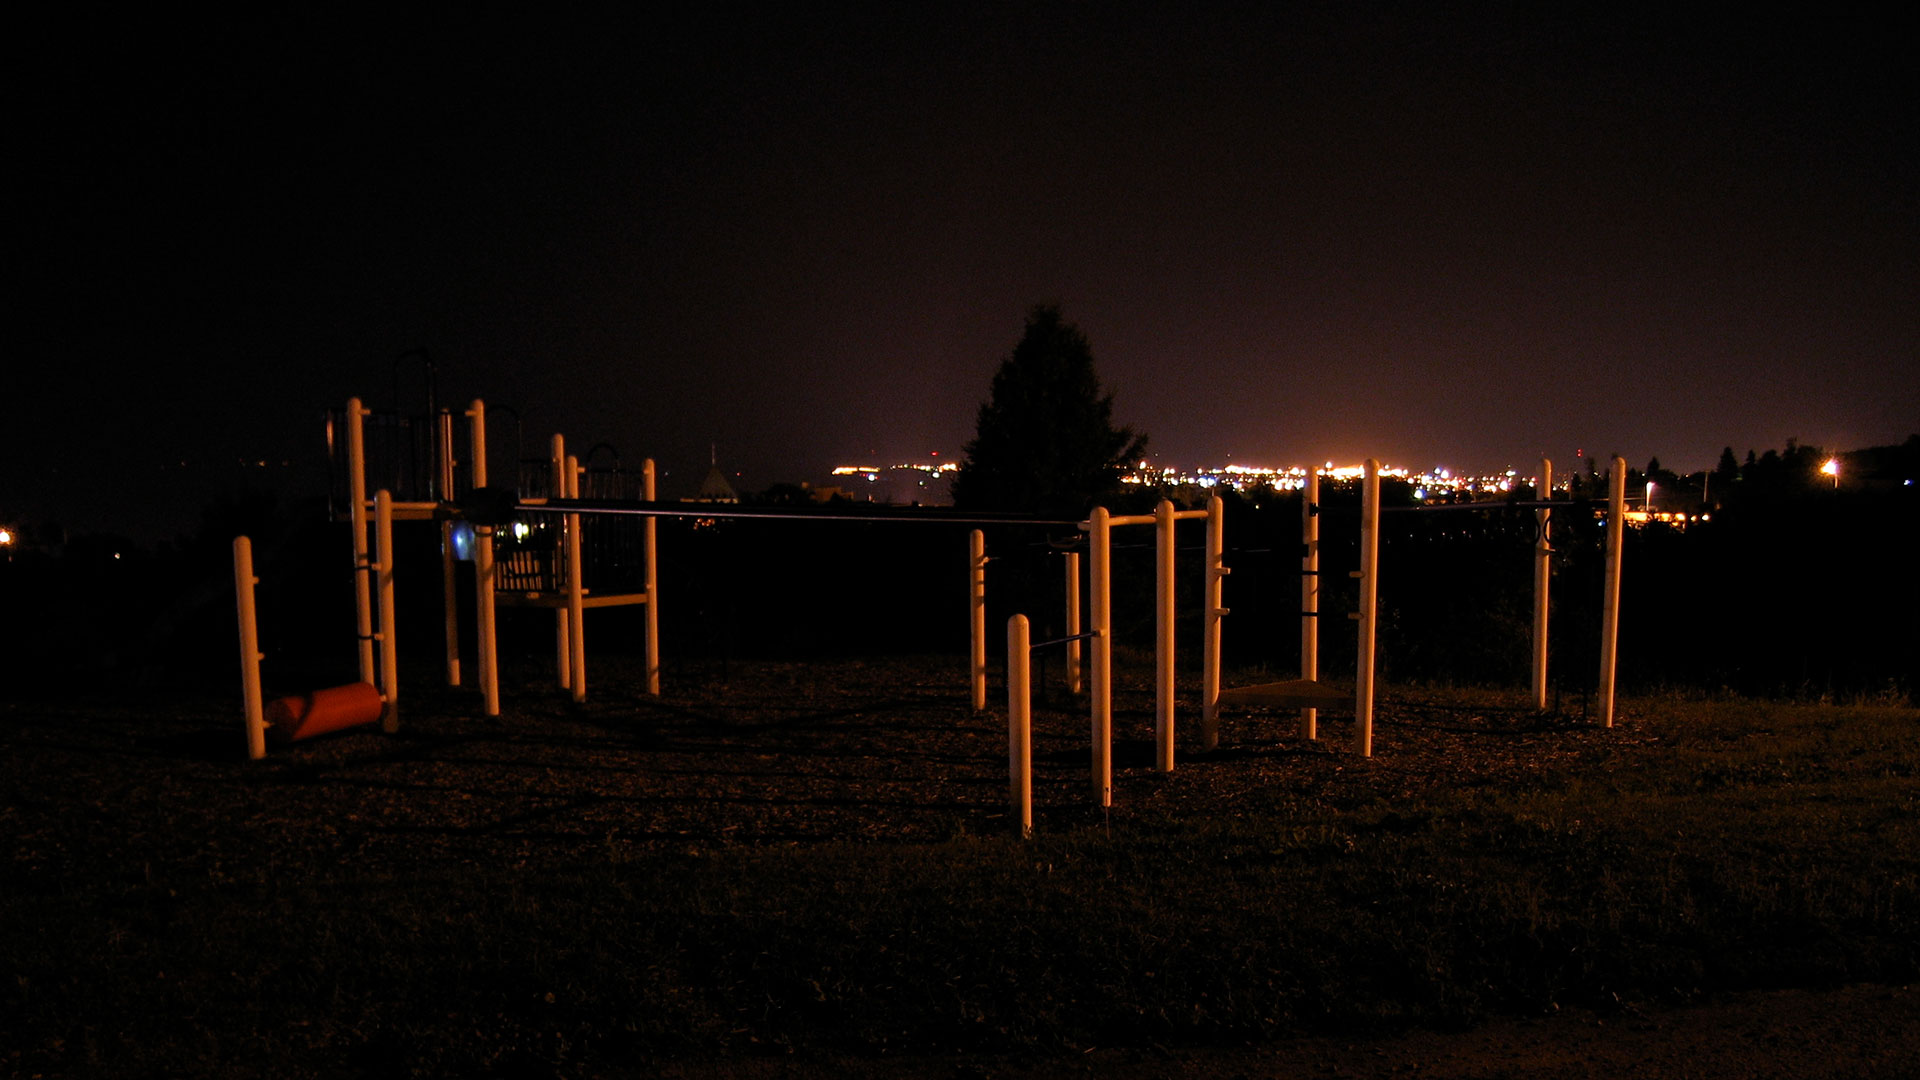 A playground at night, spooky